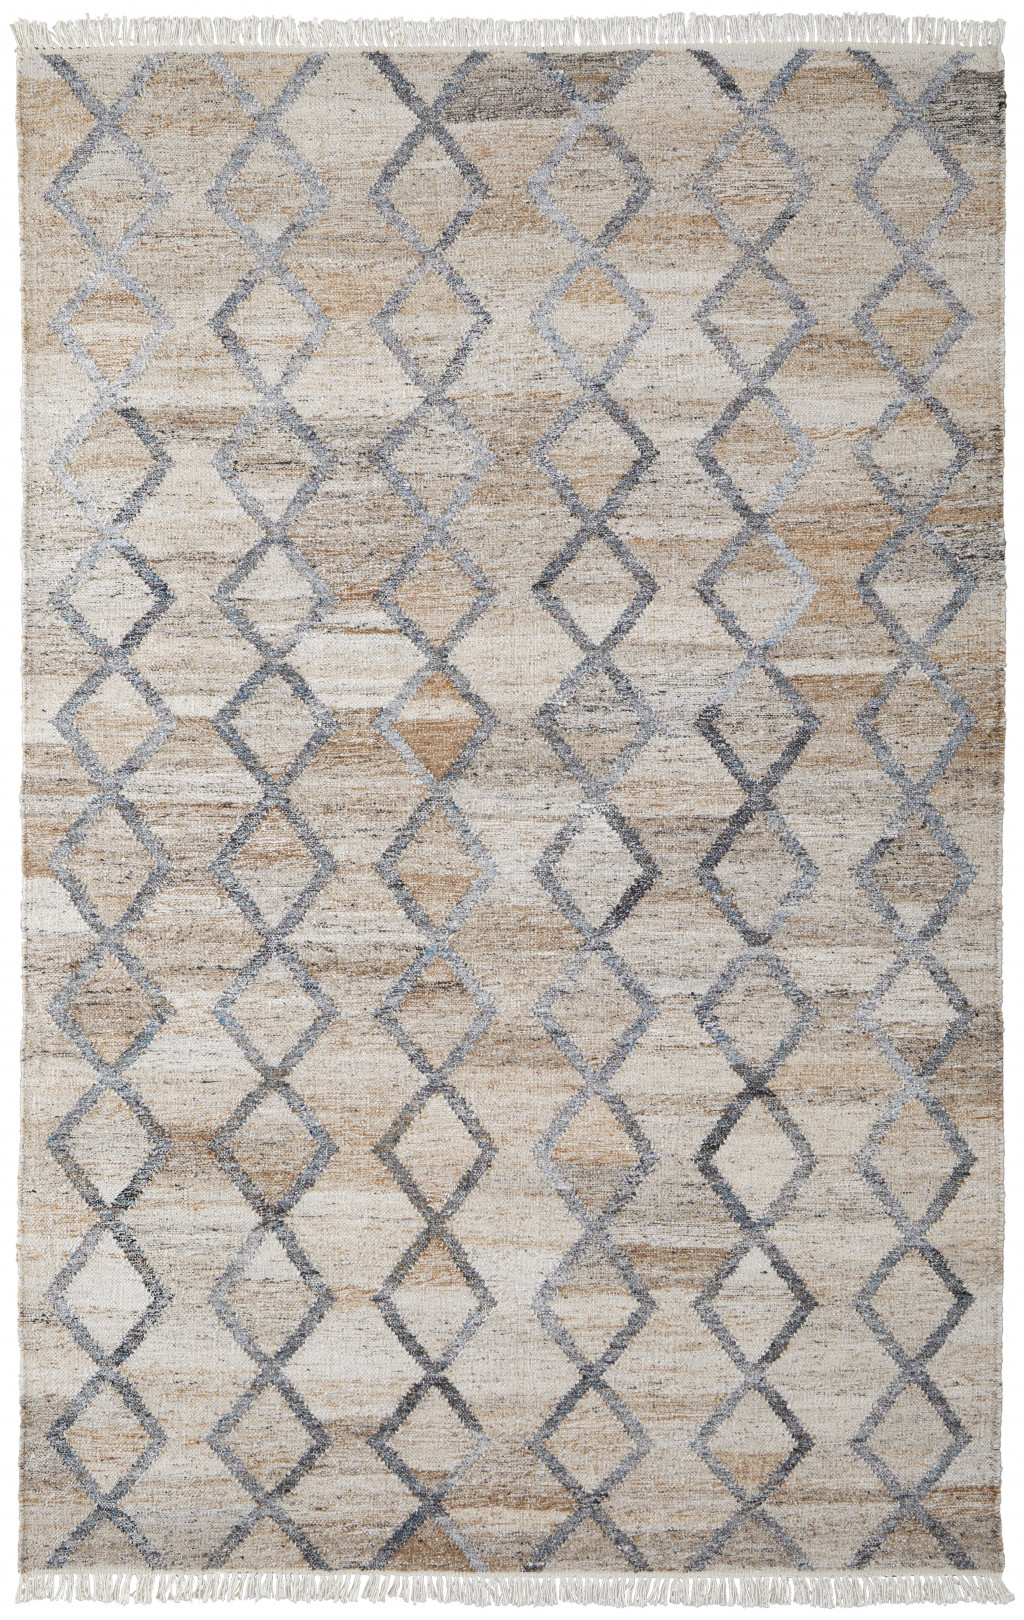 10' X 13' Gray Ivory And Tan Geometric Hand Woven Stain Resistant Area Rug With Fringe-512432-1